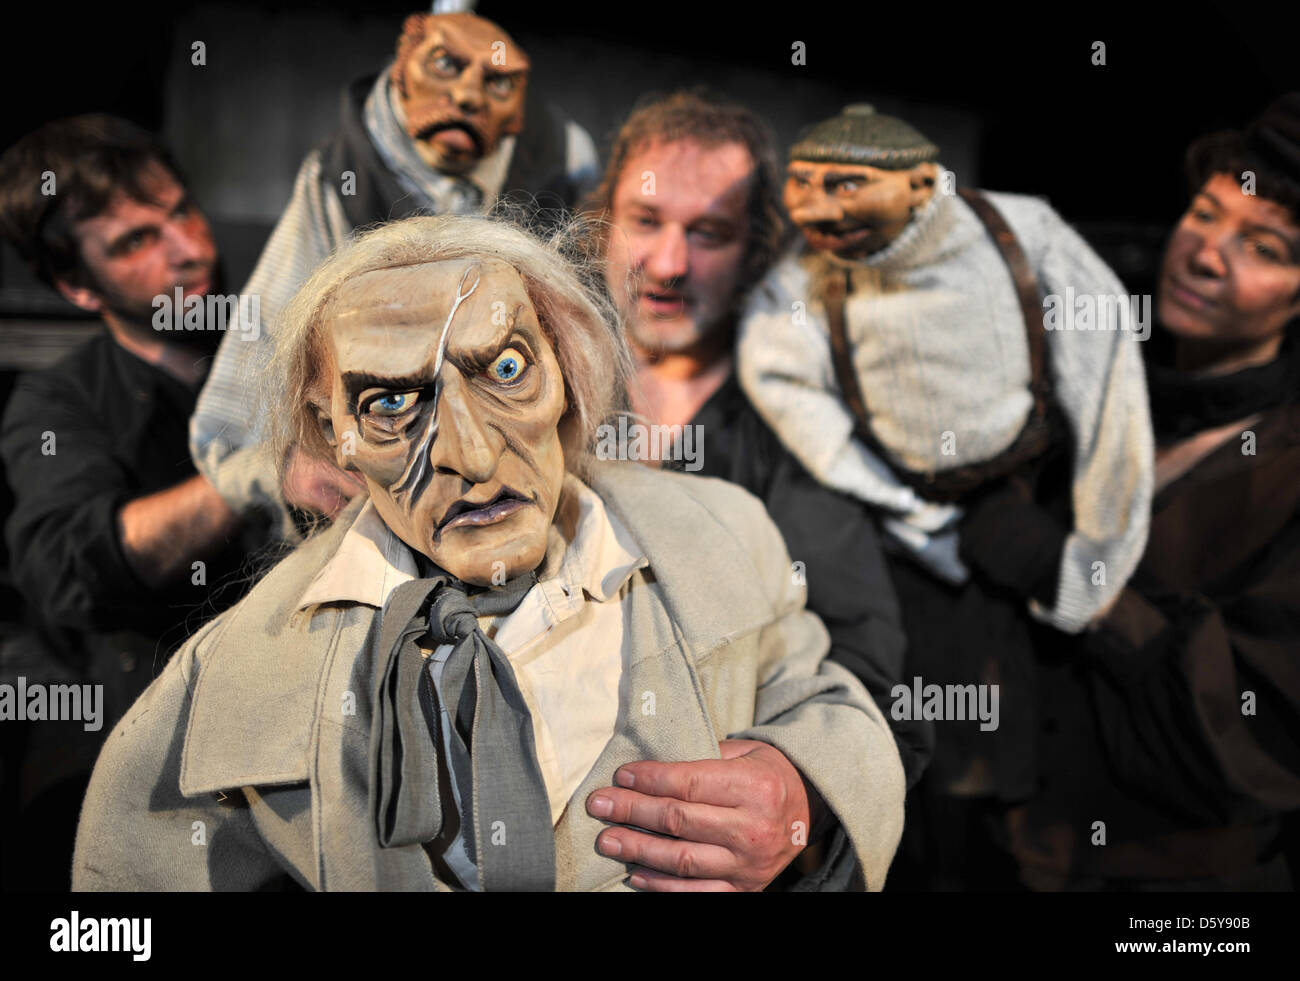 Puppetier Bernd Haeussler, Detlef Plath and Gundula Hoffmann stand with figures from the play "Moby Dick" on the stage of the puppet theater in Zwickau, Germany, 18 October 2012. The puppet theater is turning 60 and will celebrate with a festival week and the play "Moby Dick". Photo: Hendrik Schmidt Stock Photo